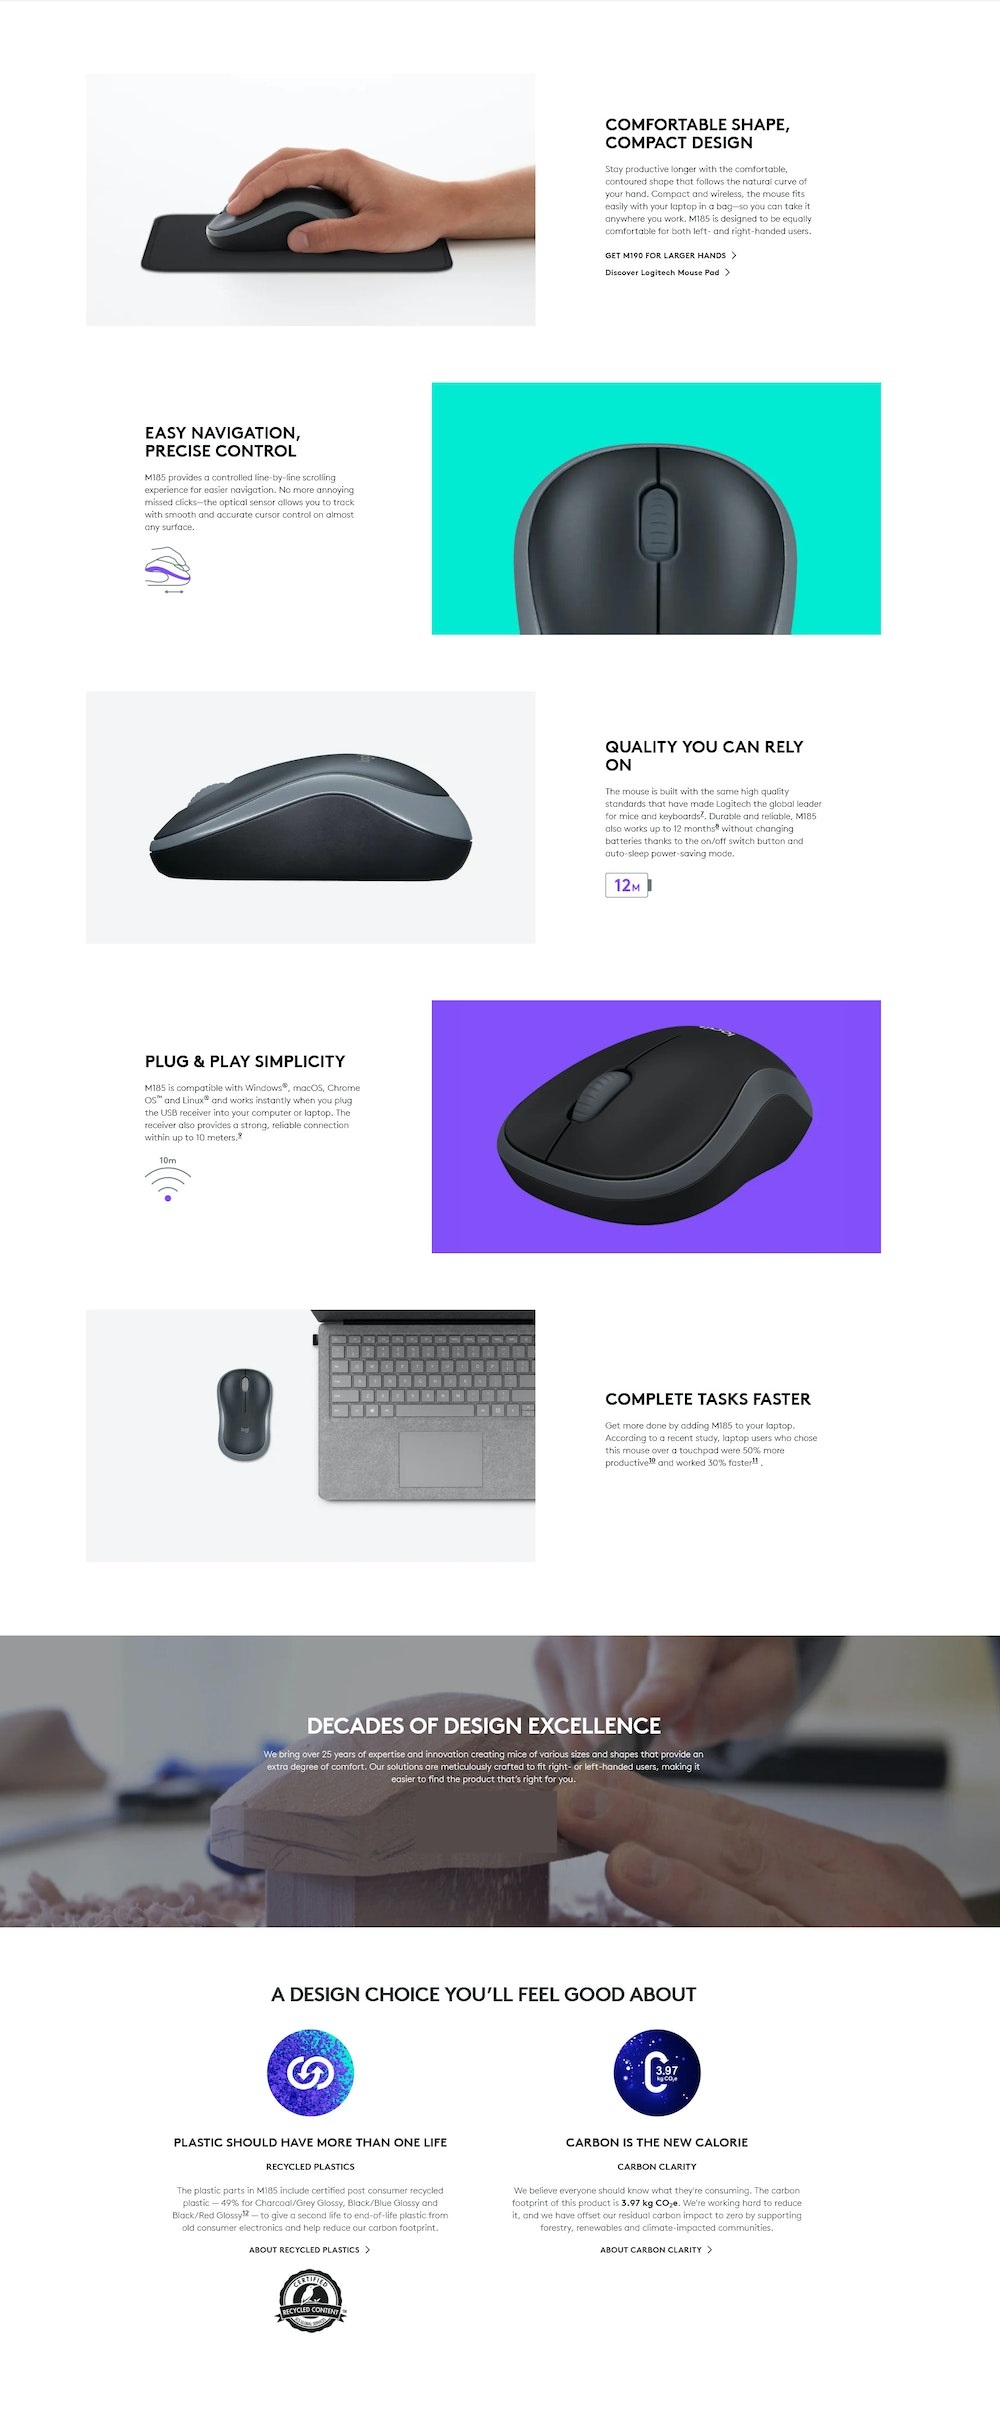 A large marketing image providing additional information about the product Logitech M185 Compact Wireless Mouse - Red - Additional alt info not provided